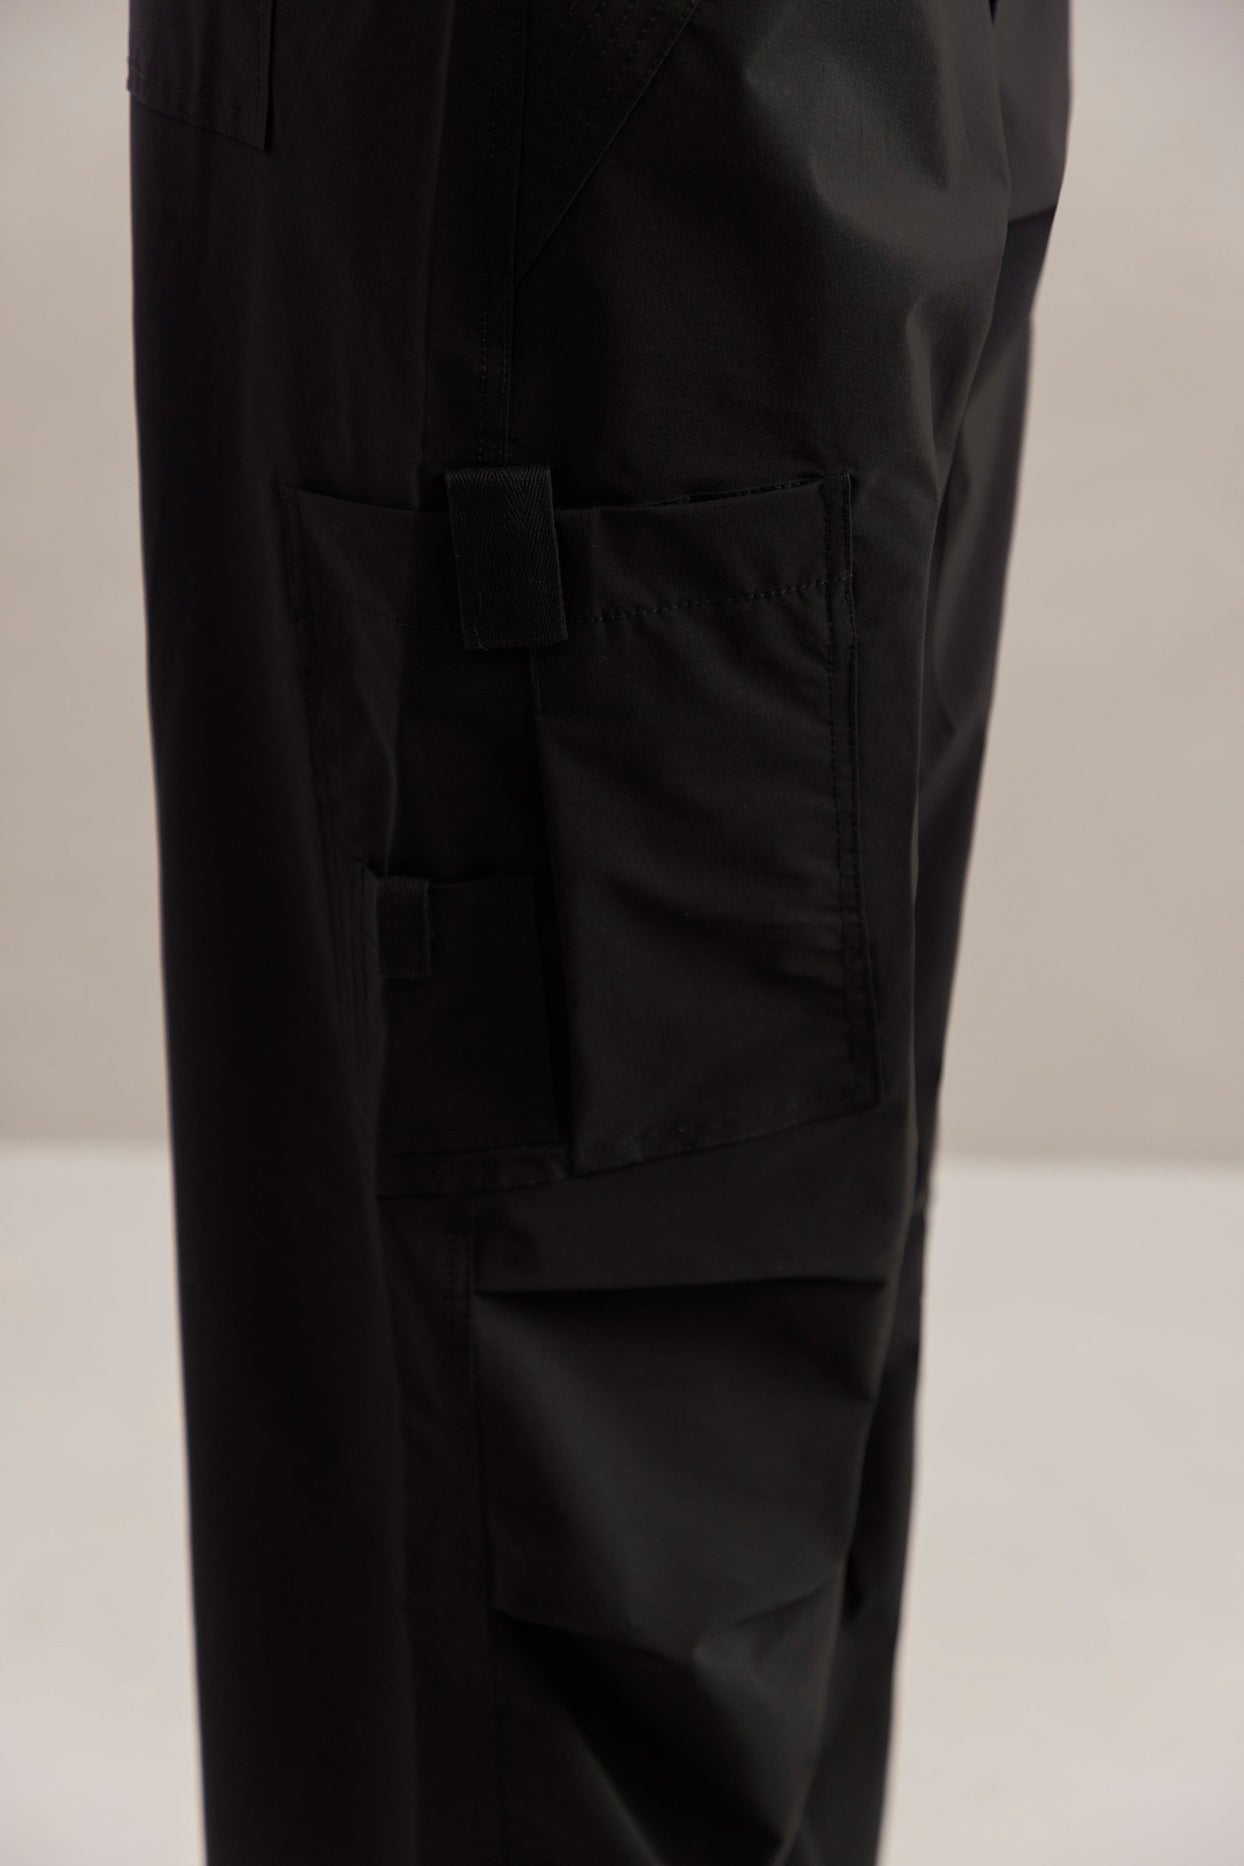 Black Polly Rori | Oh Trousers Wide in Leg Cargo